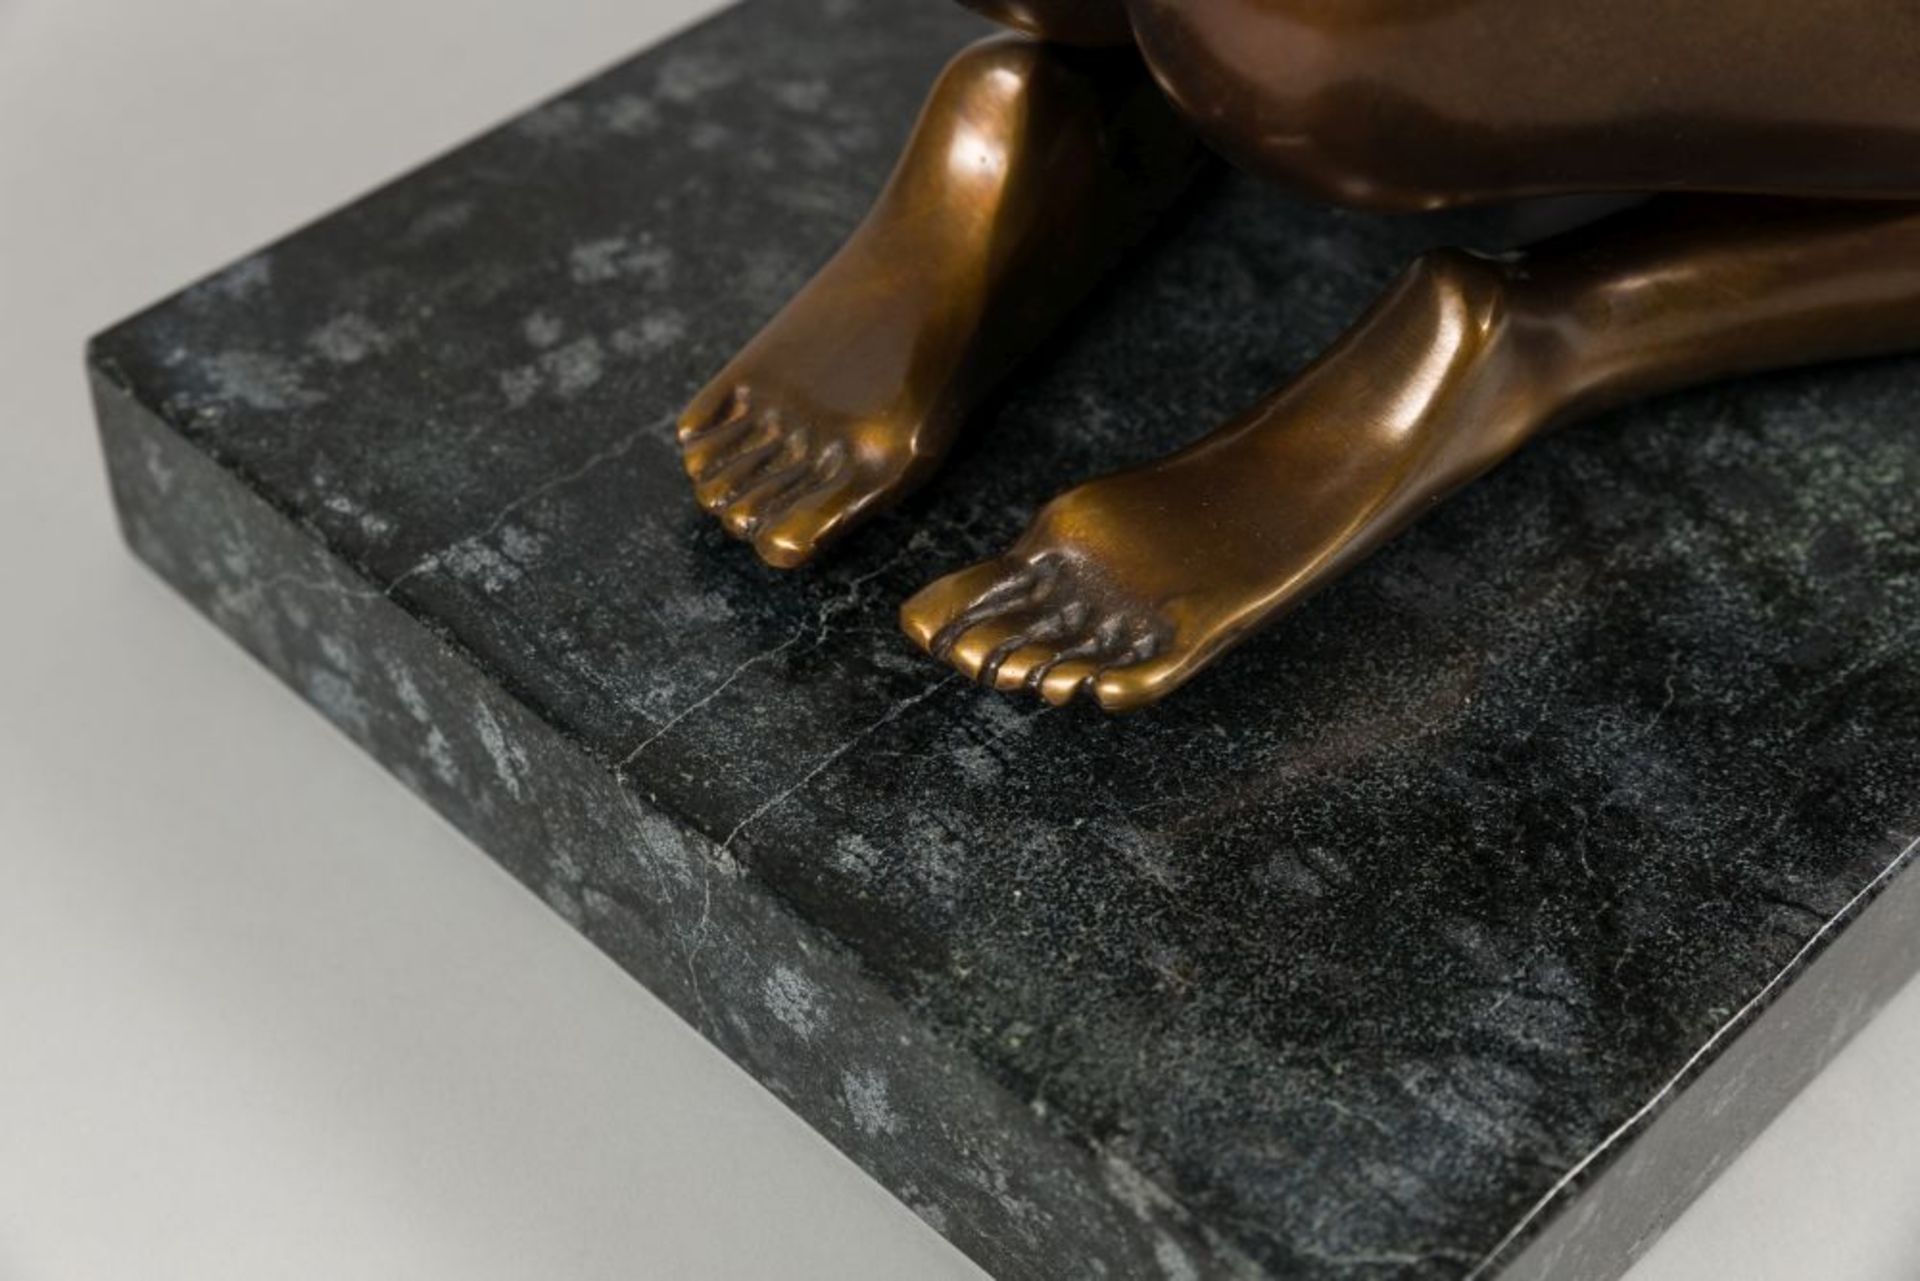 Viennese Sphinx Bronze on granite-pedestal Signed and numbered: 32/500 12,6 x 7,9 in - Image 7 of 11